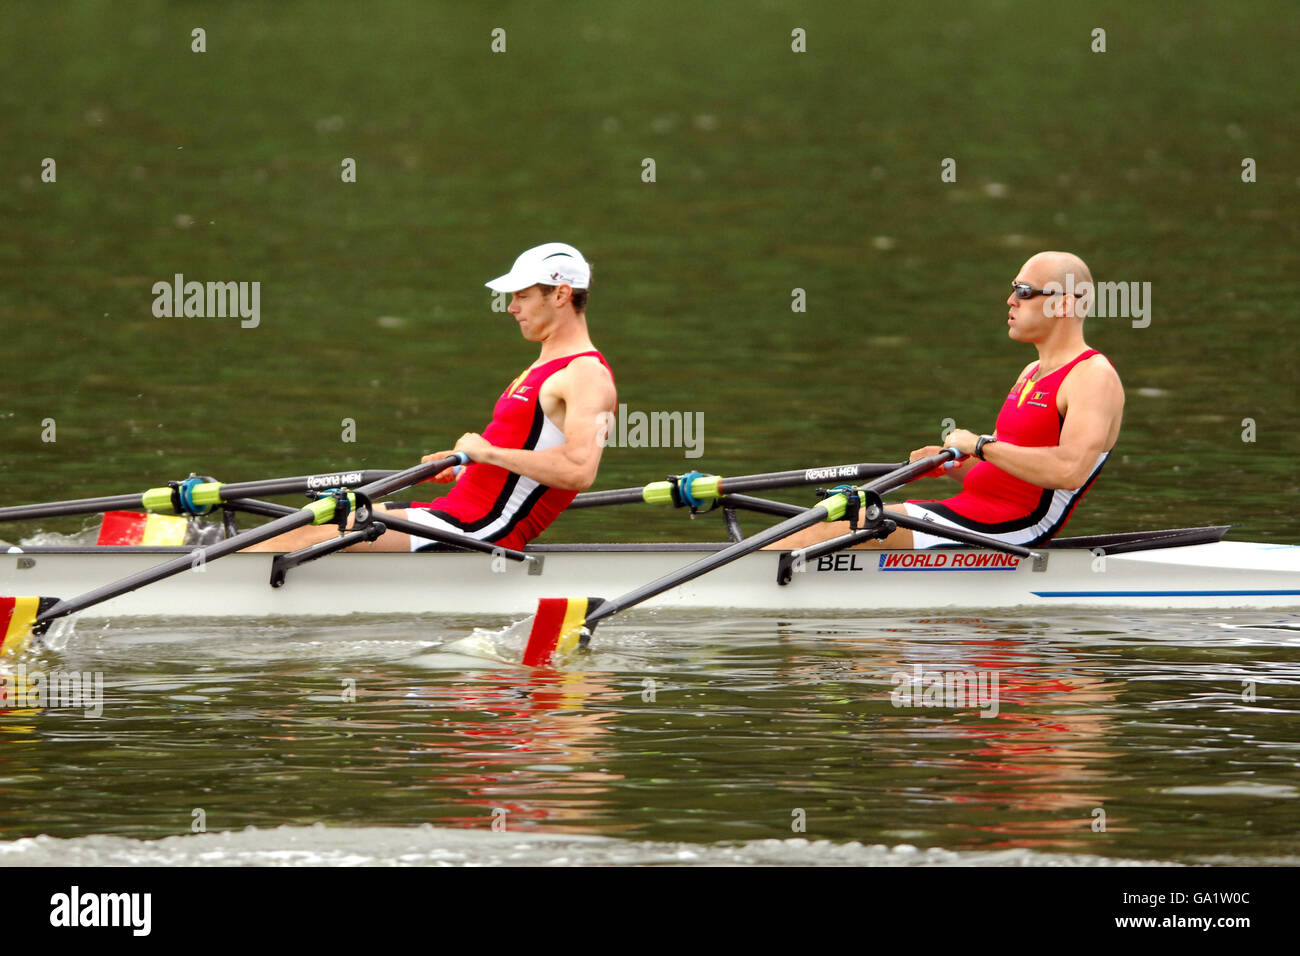 Belgium's Stijn Smulders (right) and Christophe Raes compete in the Men's Double Sculls - Repechage 1 during Event 6 of The Rowing World Cup in Bosbaan, Holland. Stock Photo